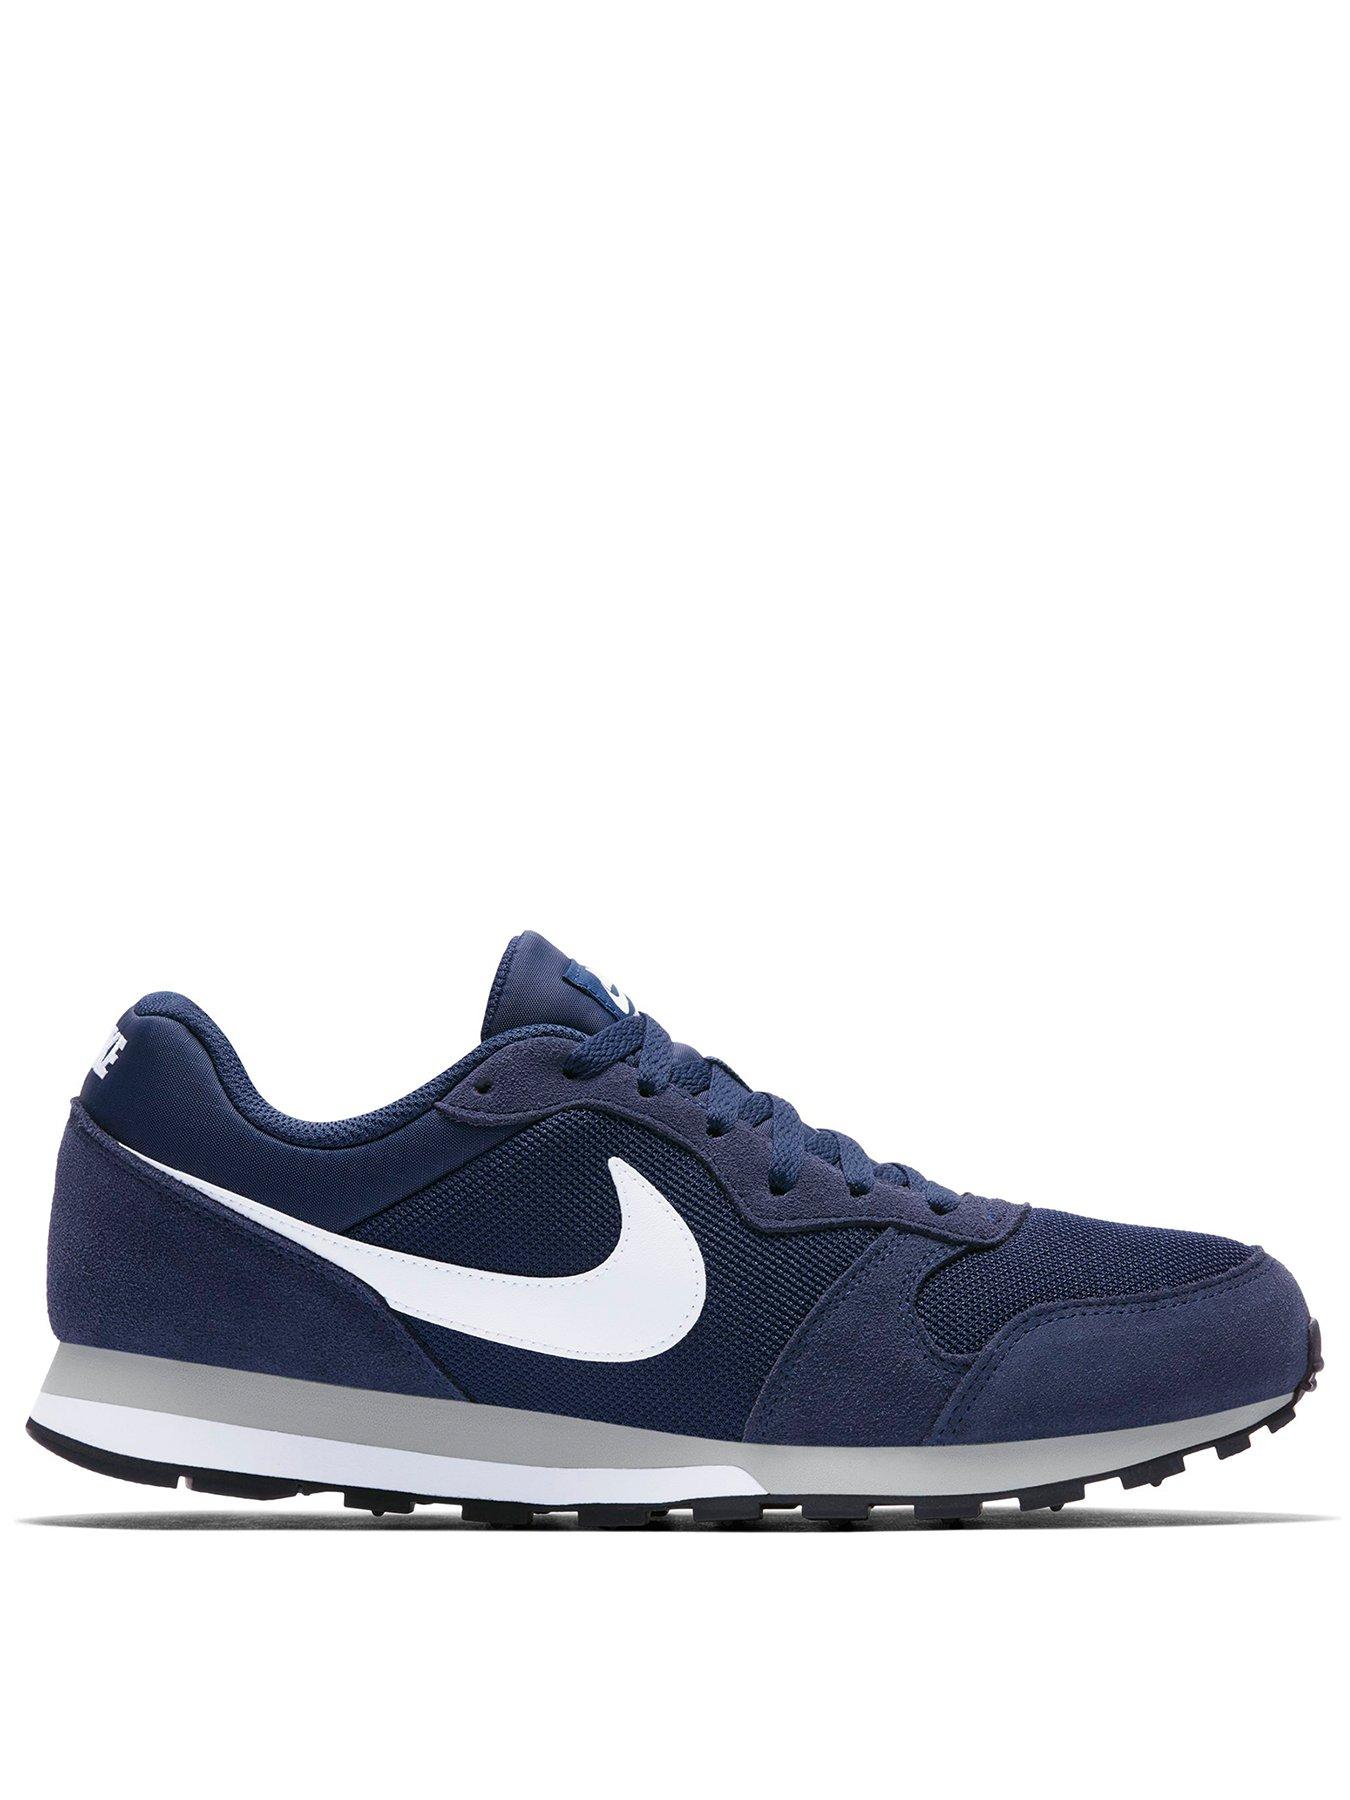 nike md runner mens trainers